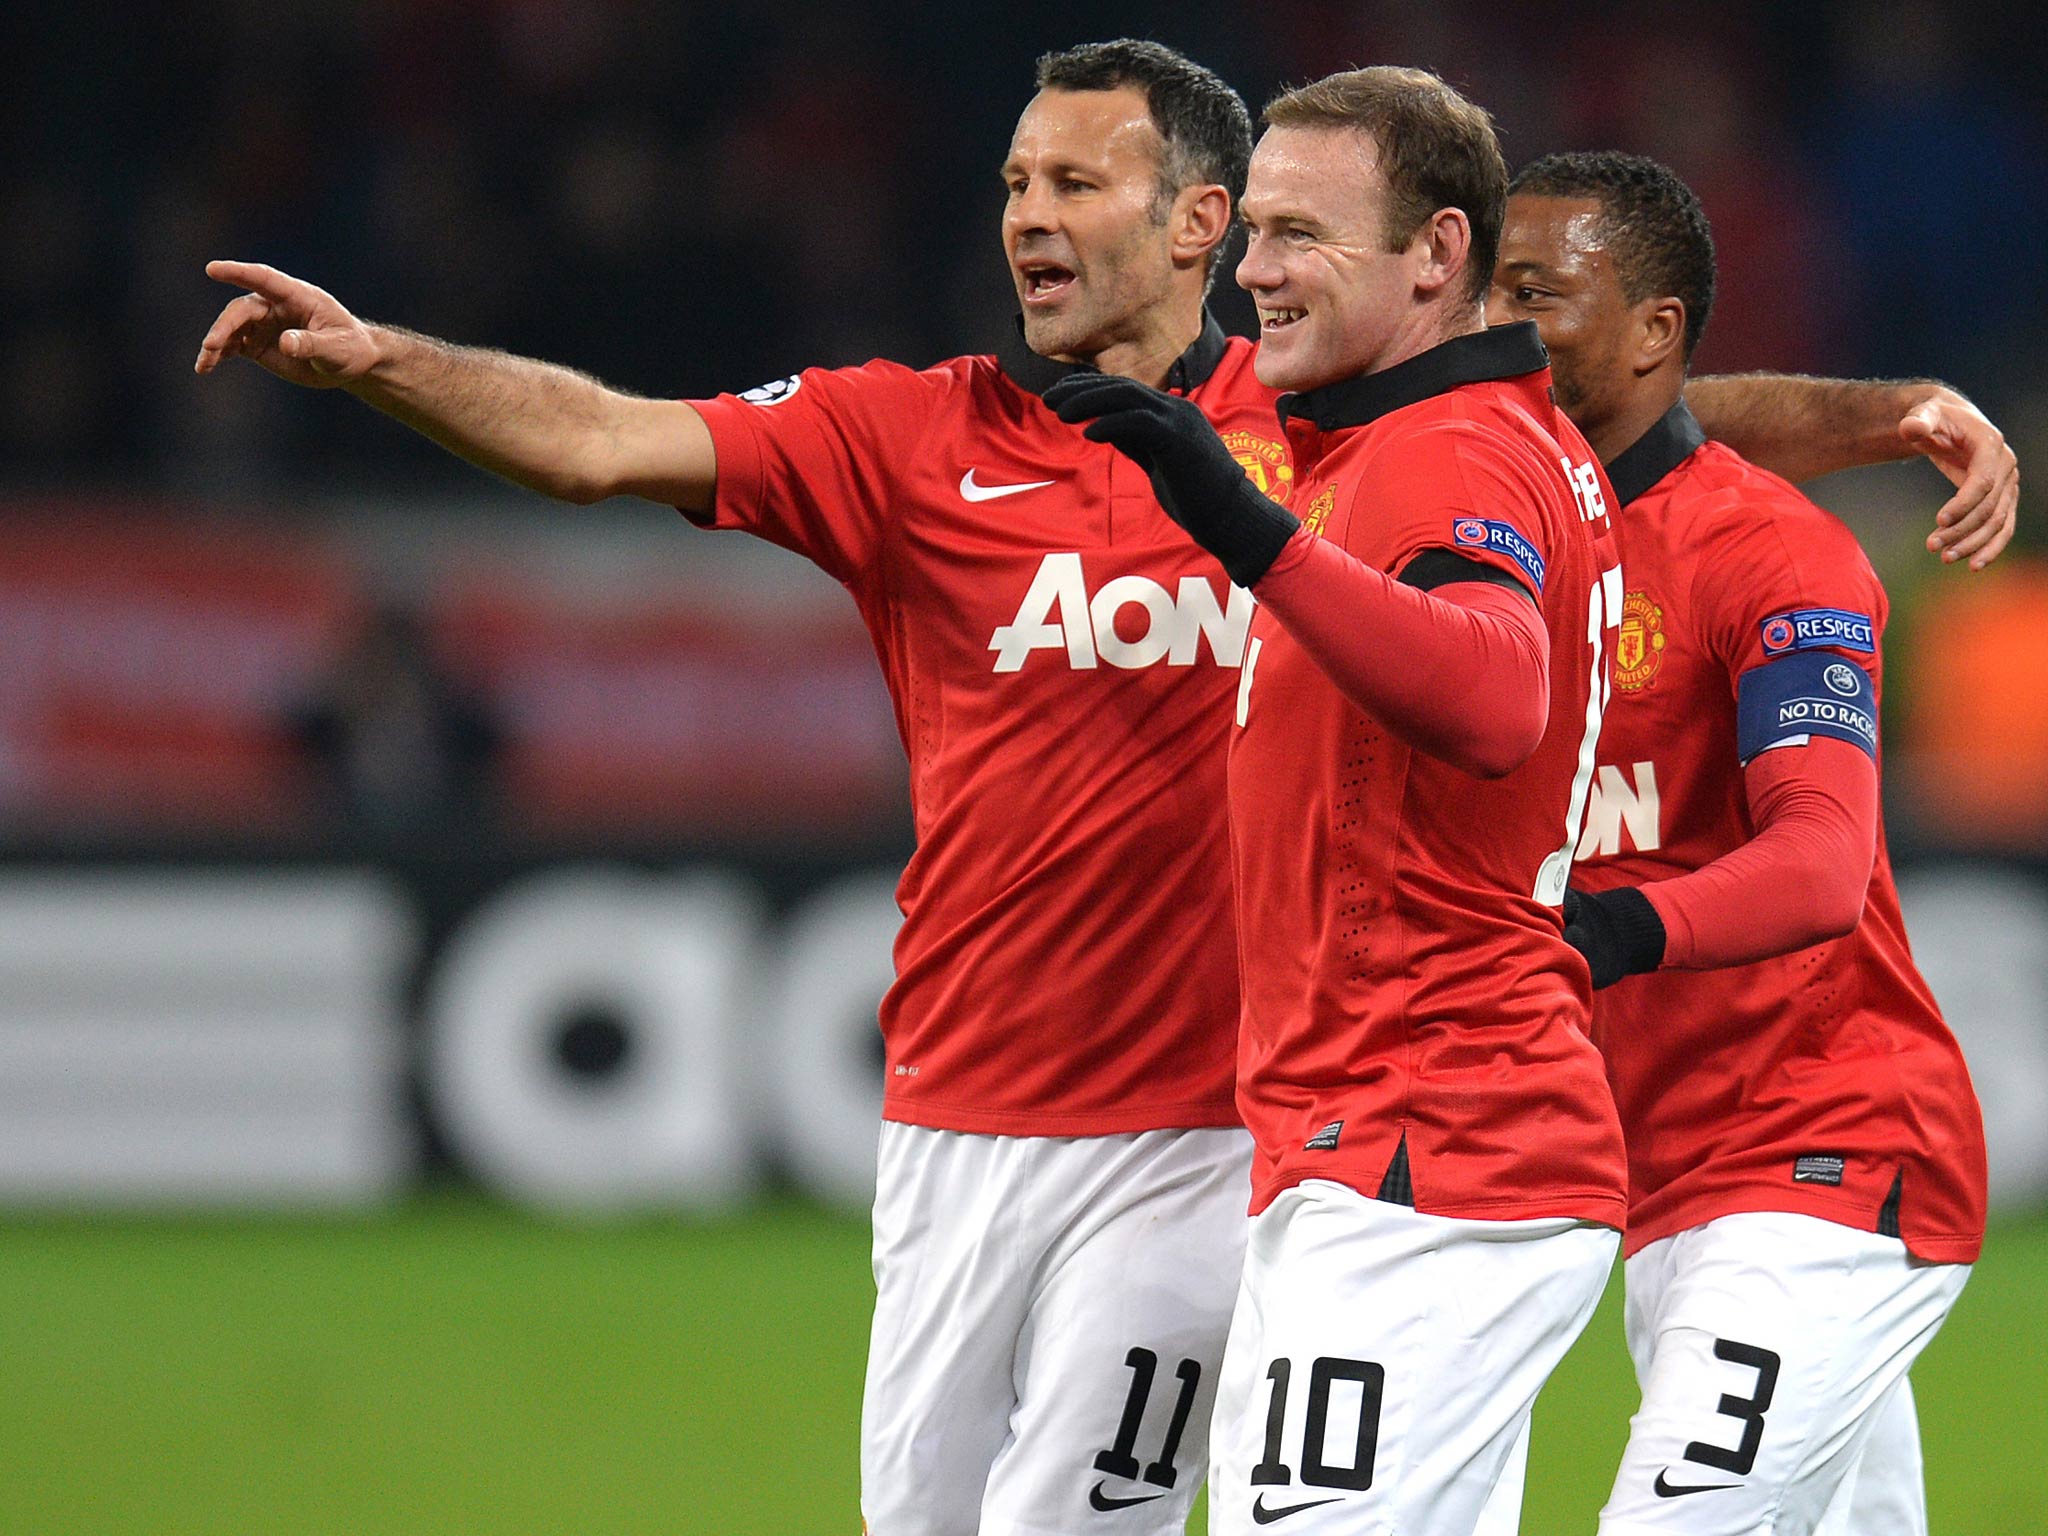 Ryan Giggs and Wayne Rooney pictured during the 5-0 victory over Bayern Leverkusen